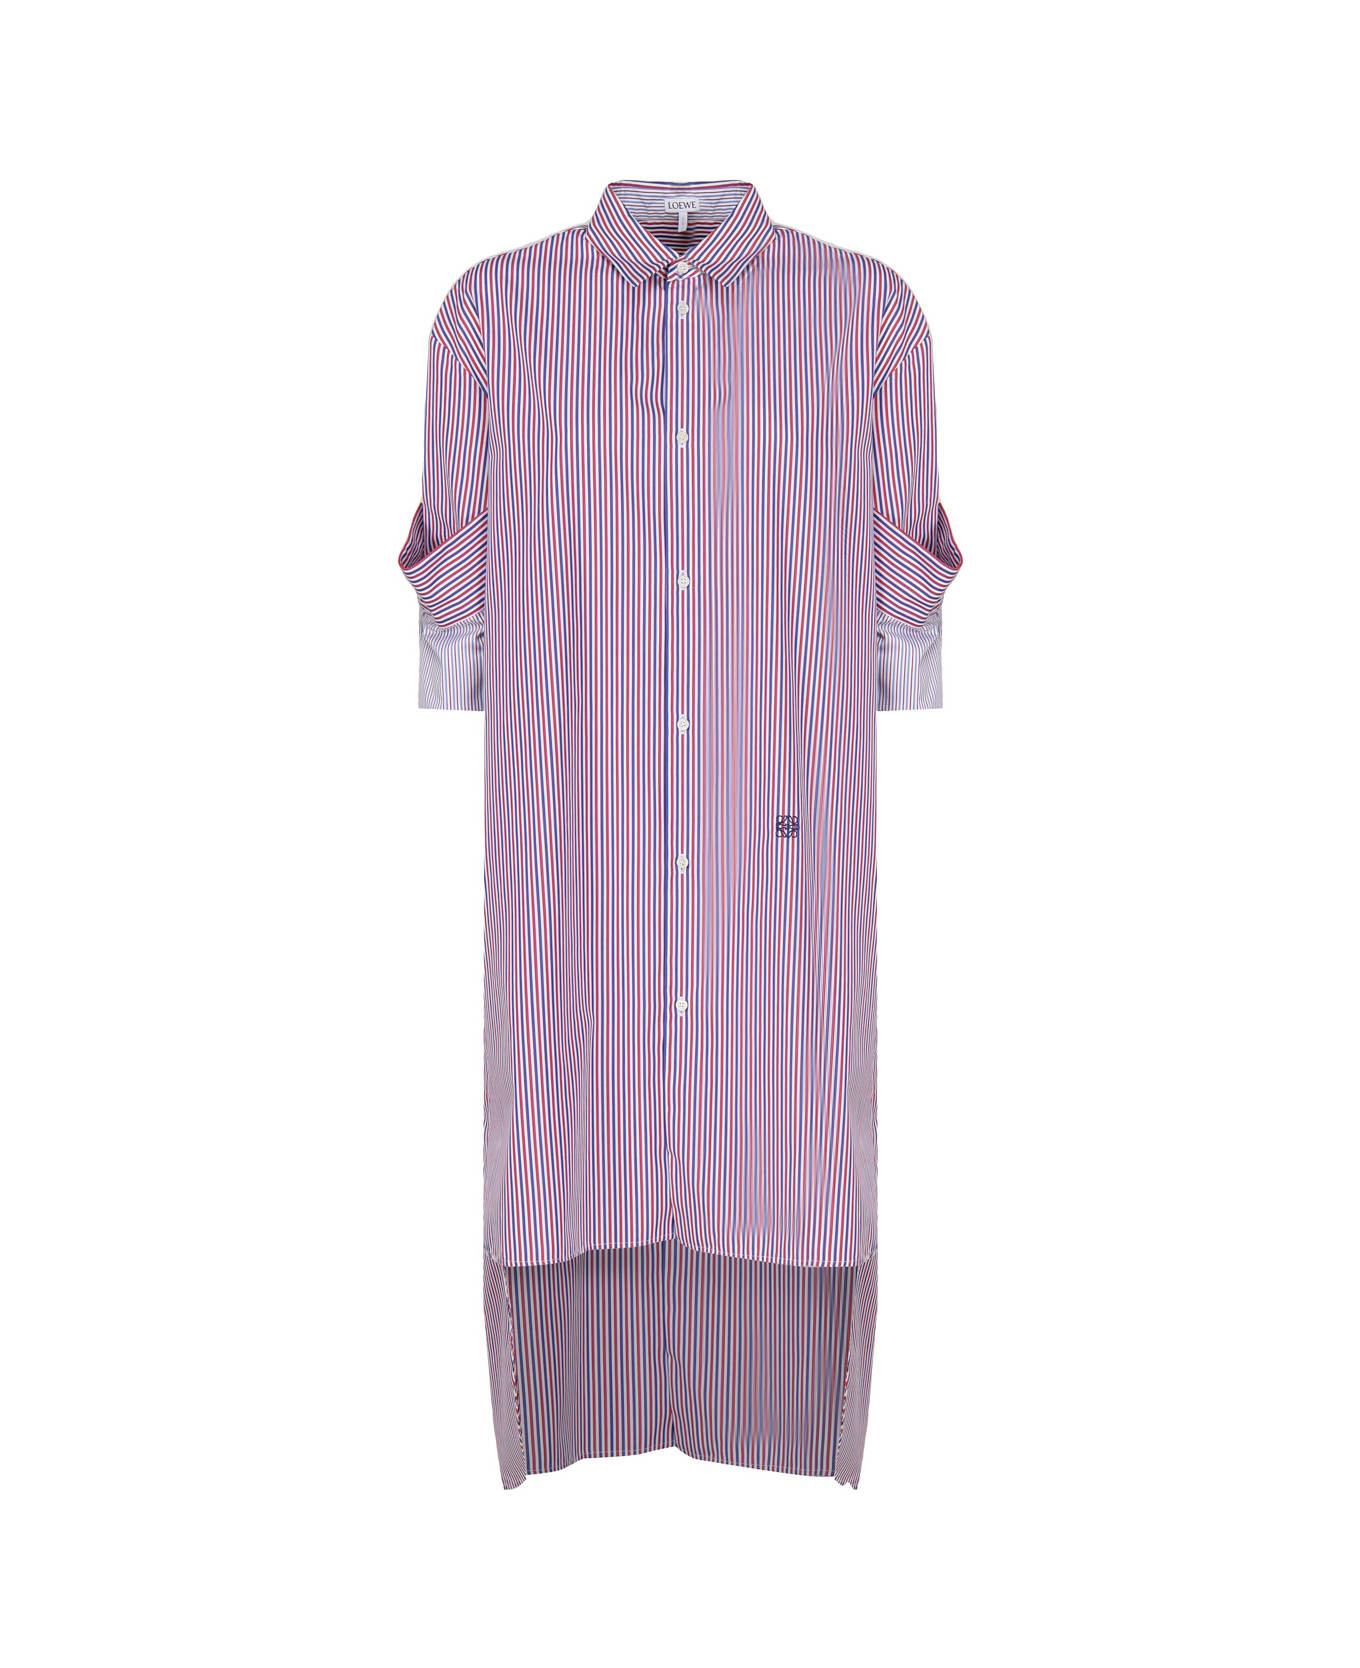 Loewe Shirt Dress With Lapel In Striped Cotton - Blue/red/white